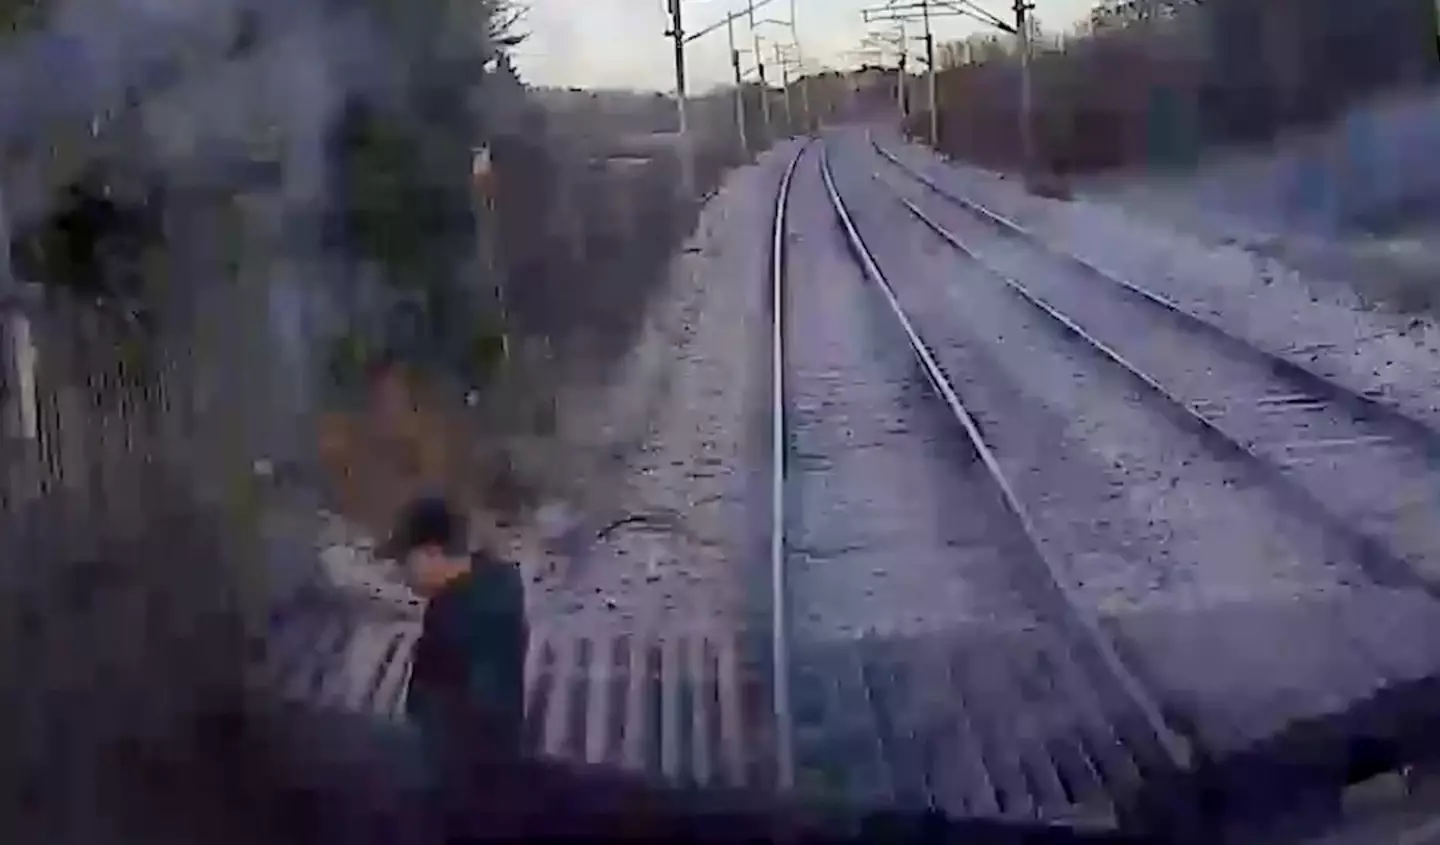 The clip has been shared to remind people to follow level crossing guidelines.